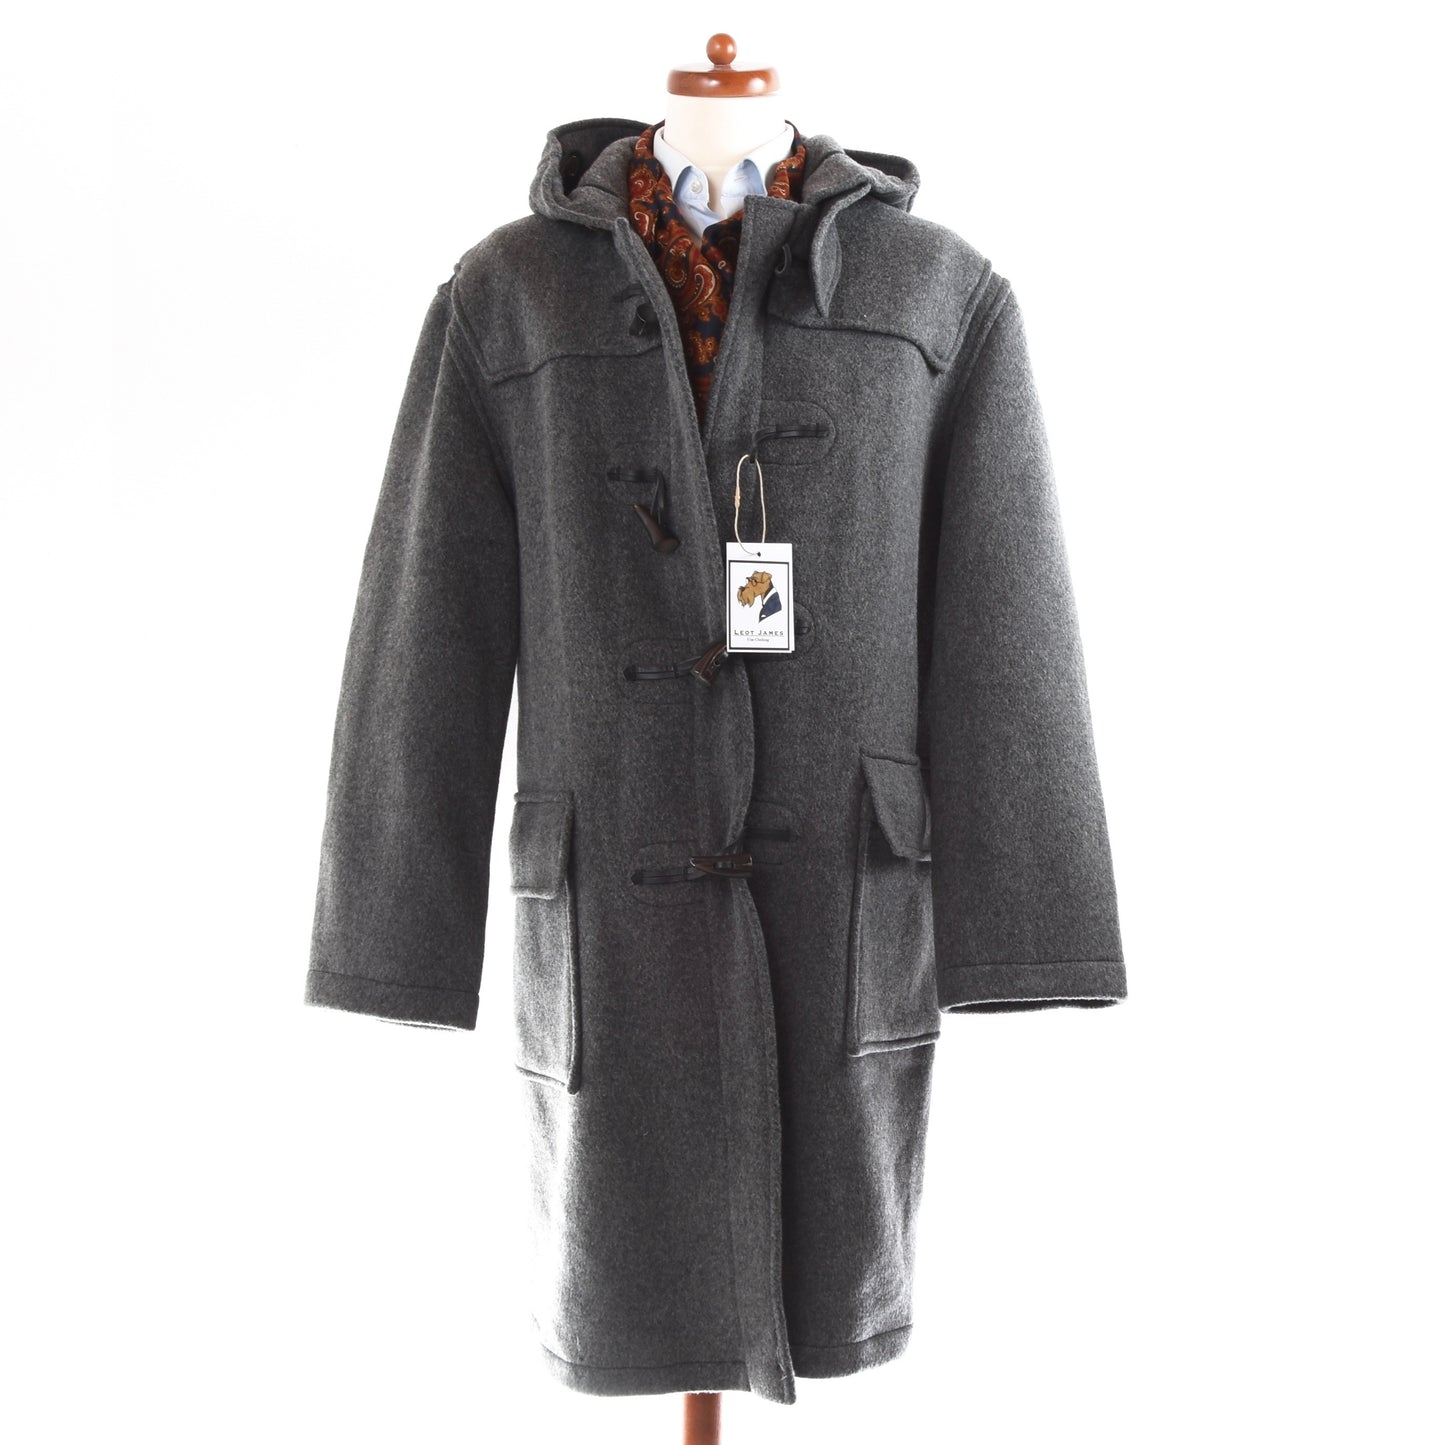 Gloverall Duffle Coat Size 56 - Grey